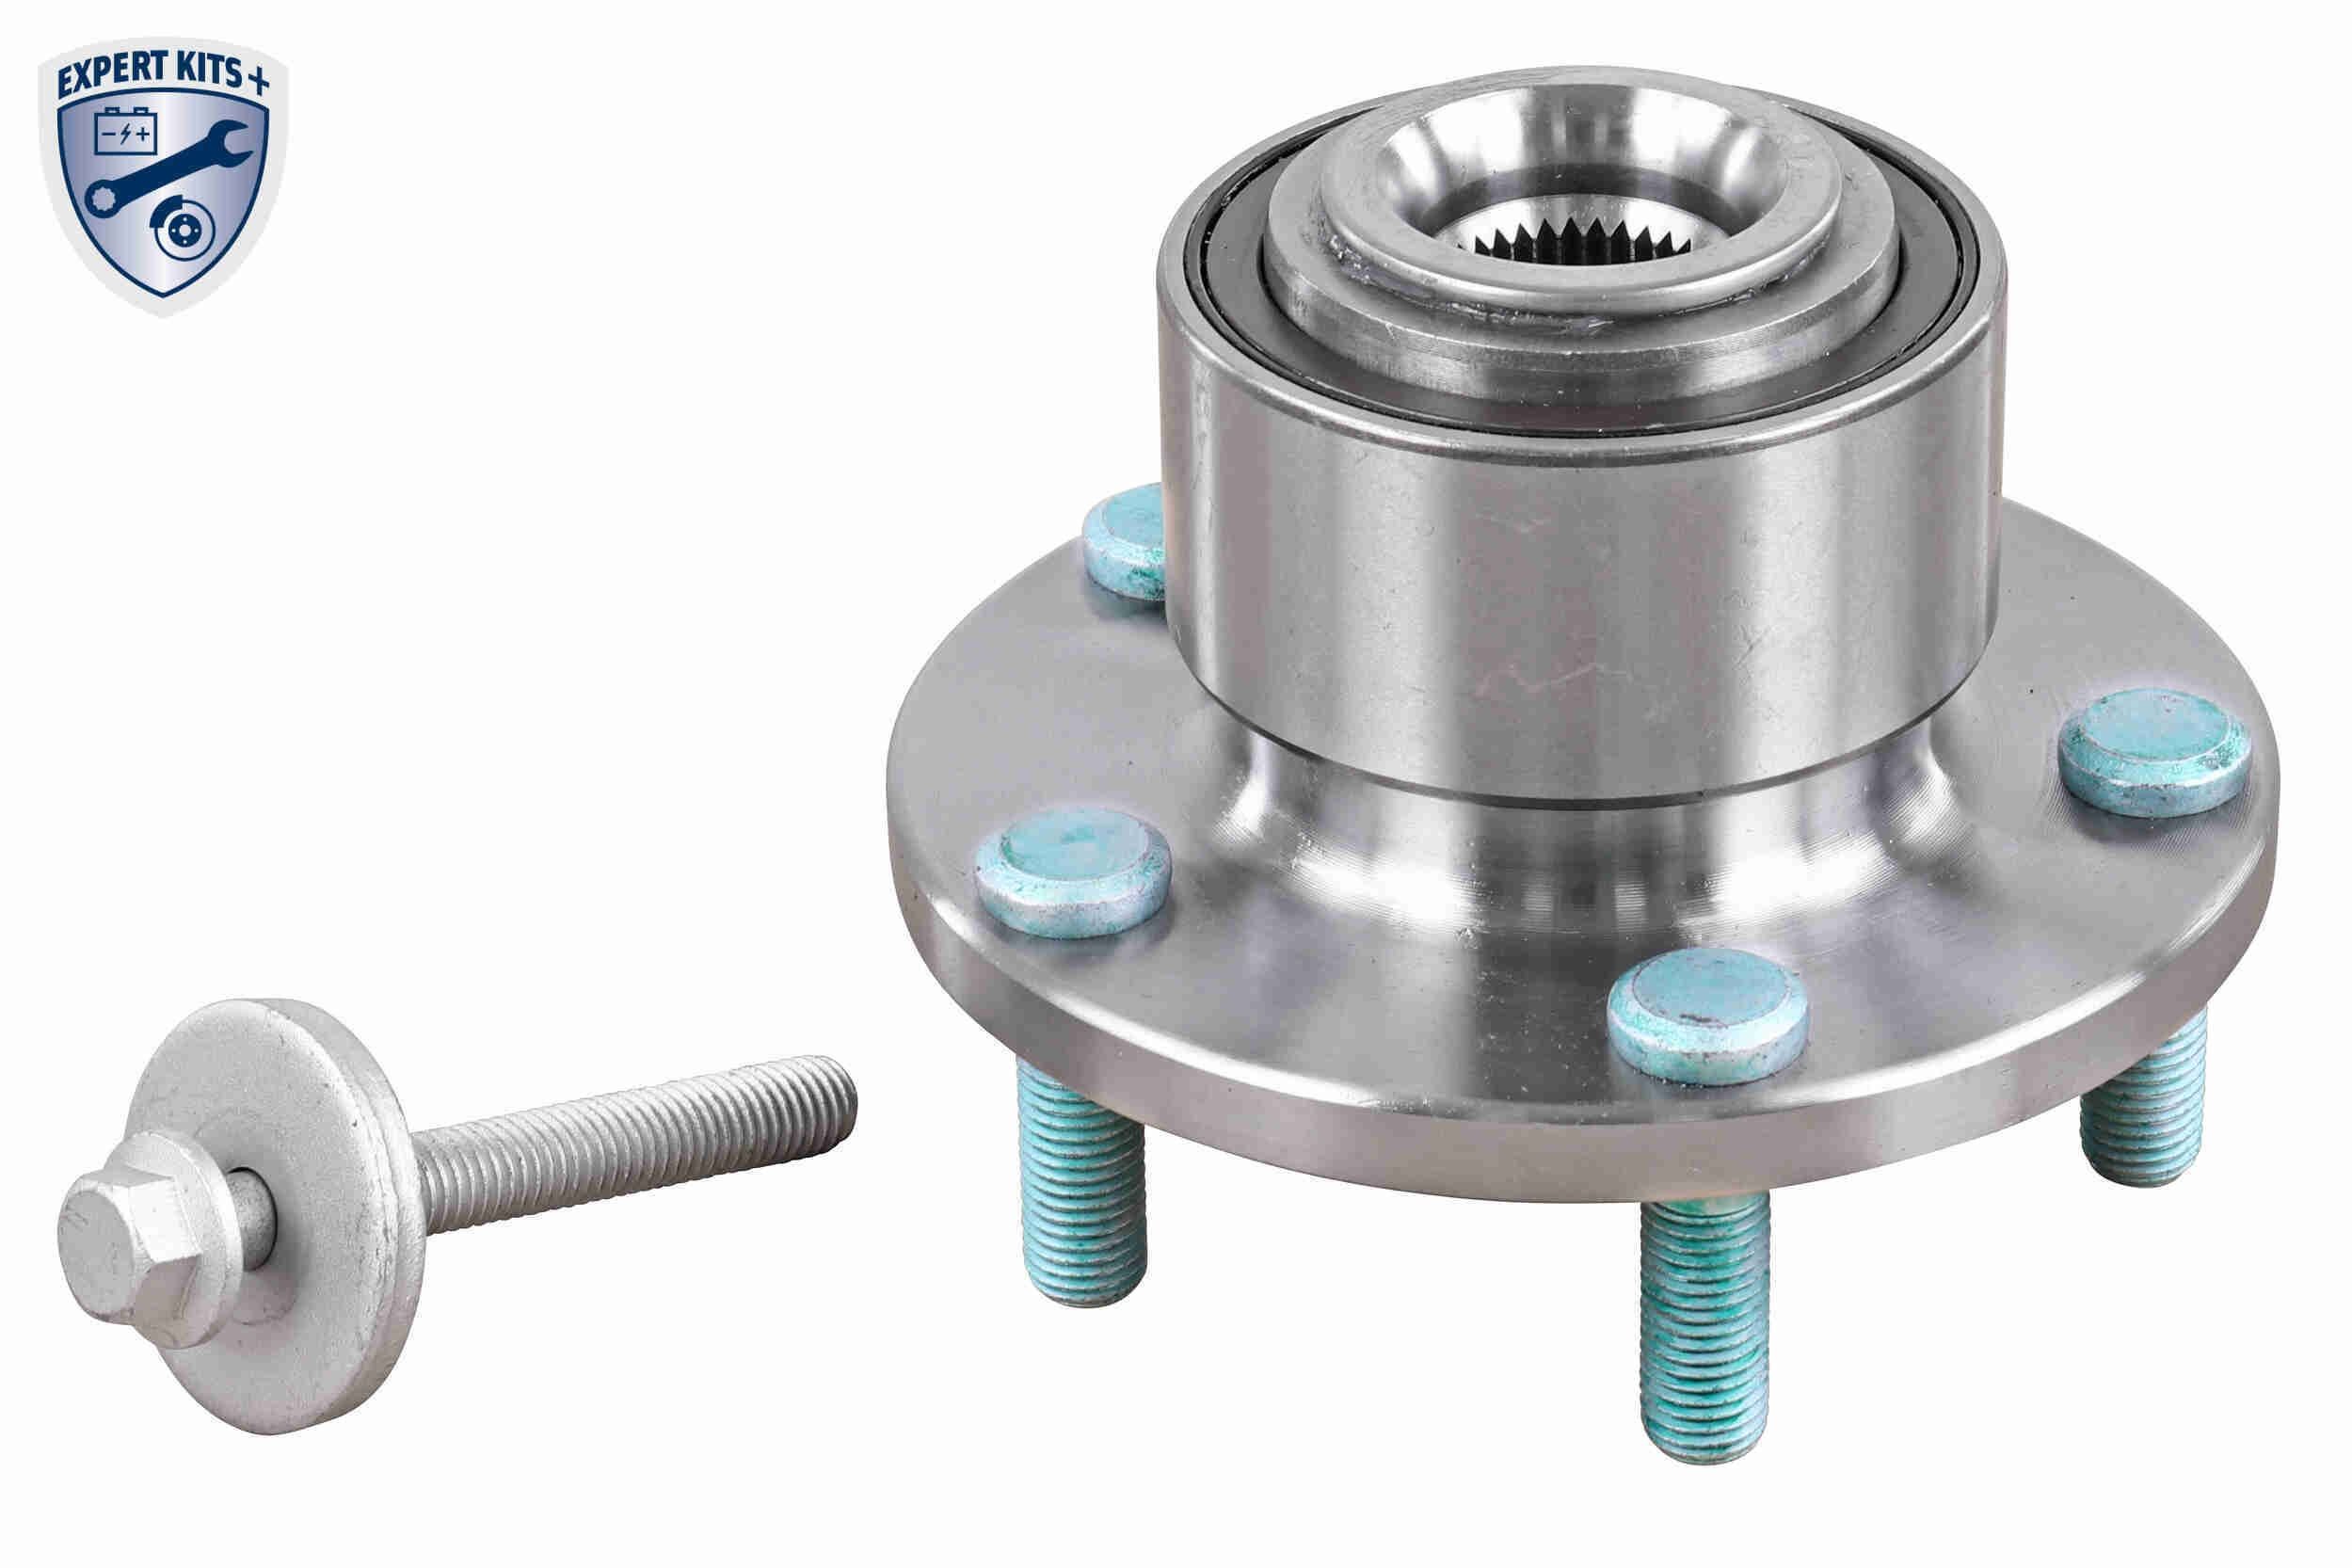 VAICO V25-0451 Wheel bearing kit Front Axle, EXPERT KITS +, with integrated magnetic sensor ring, 78, 131 mm